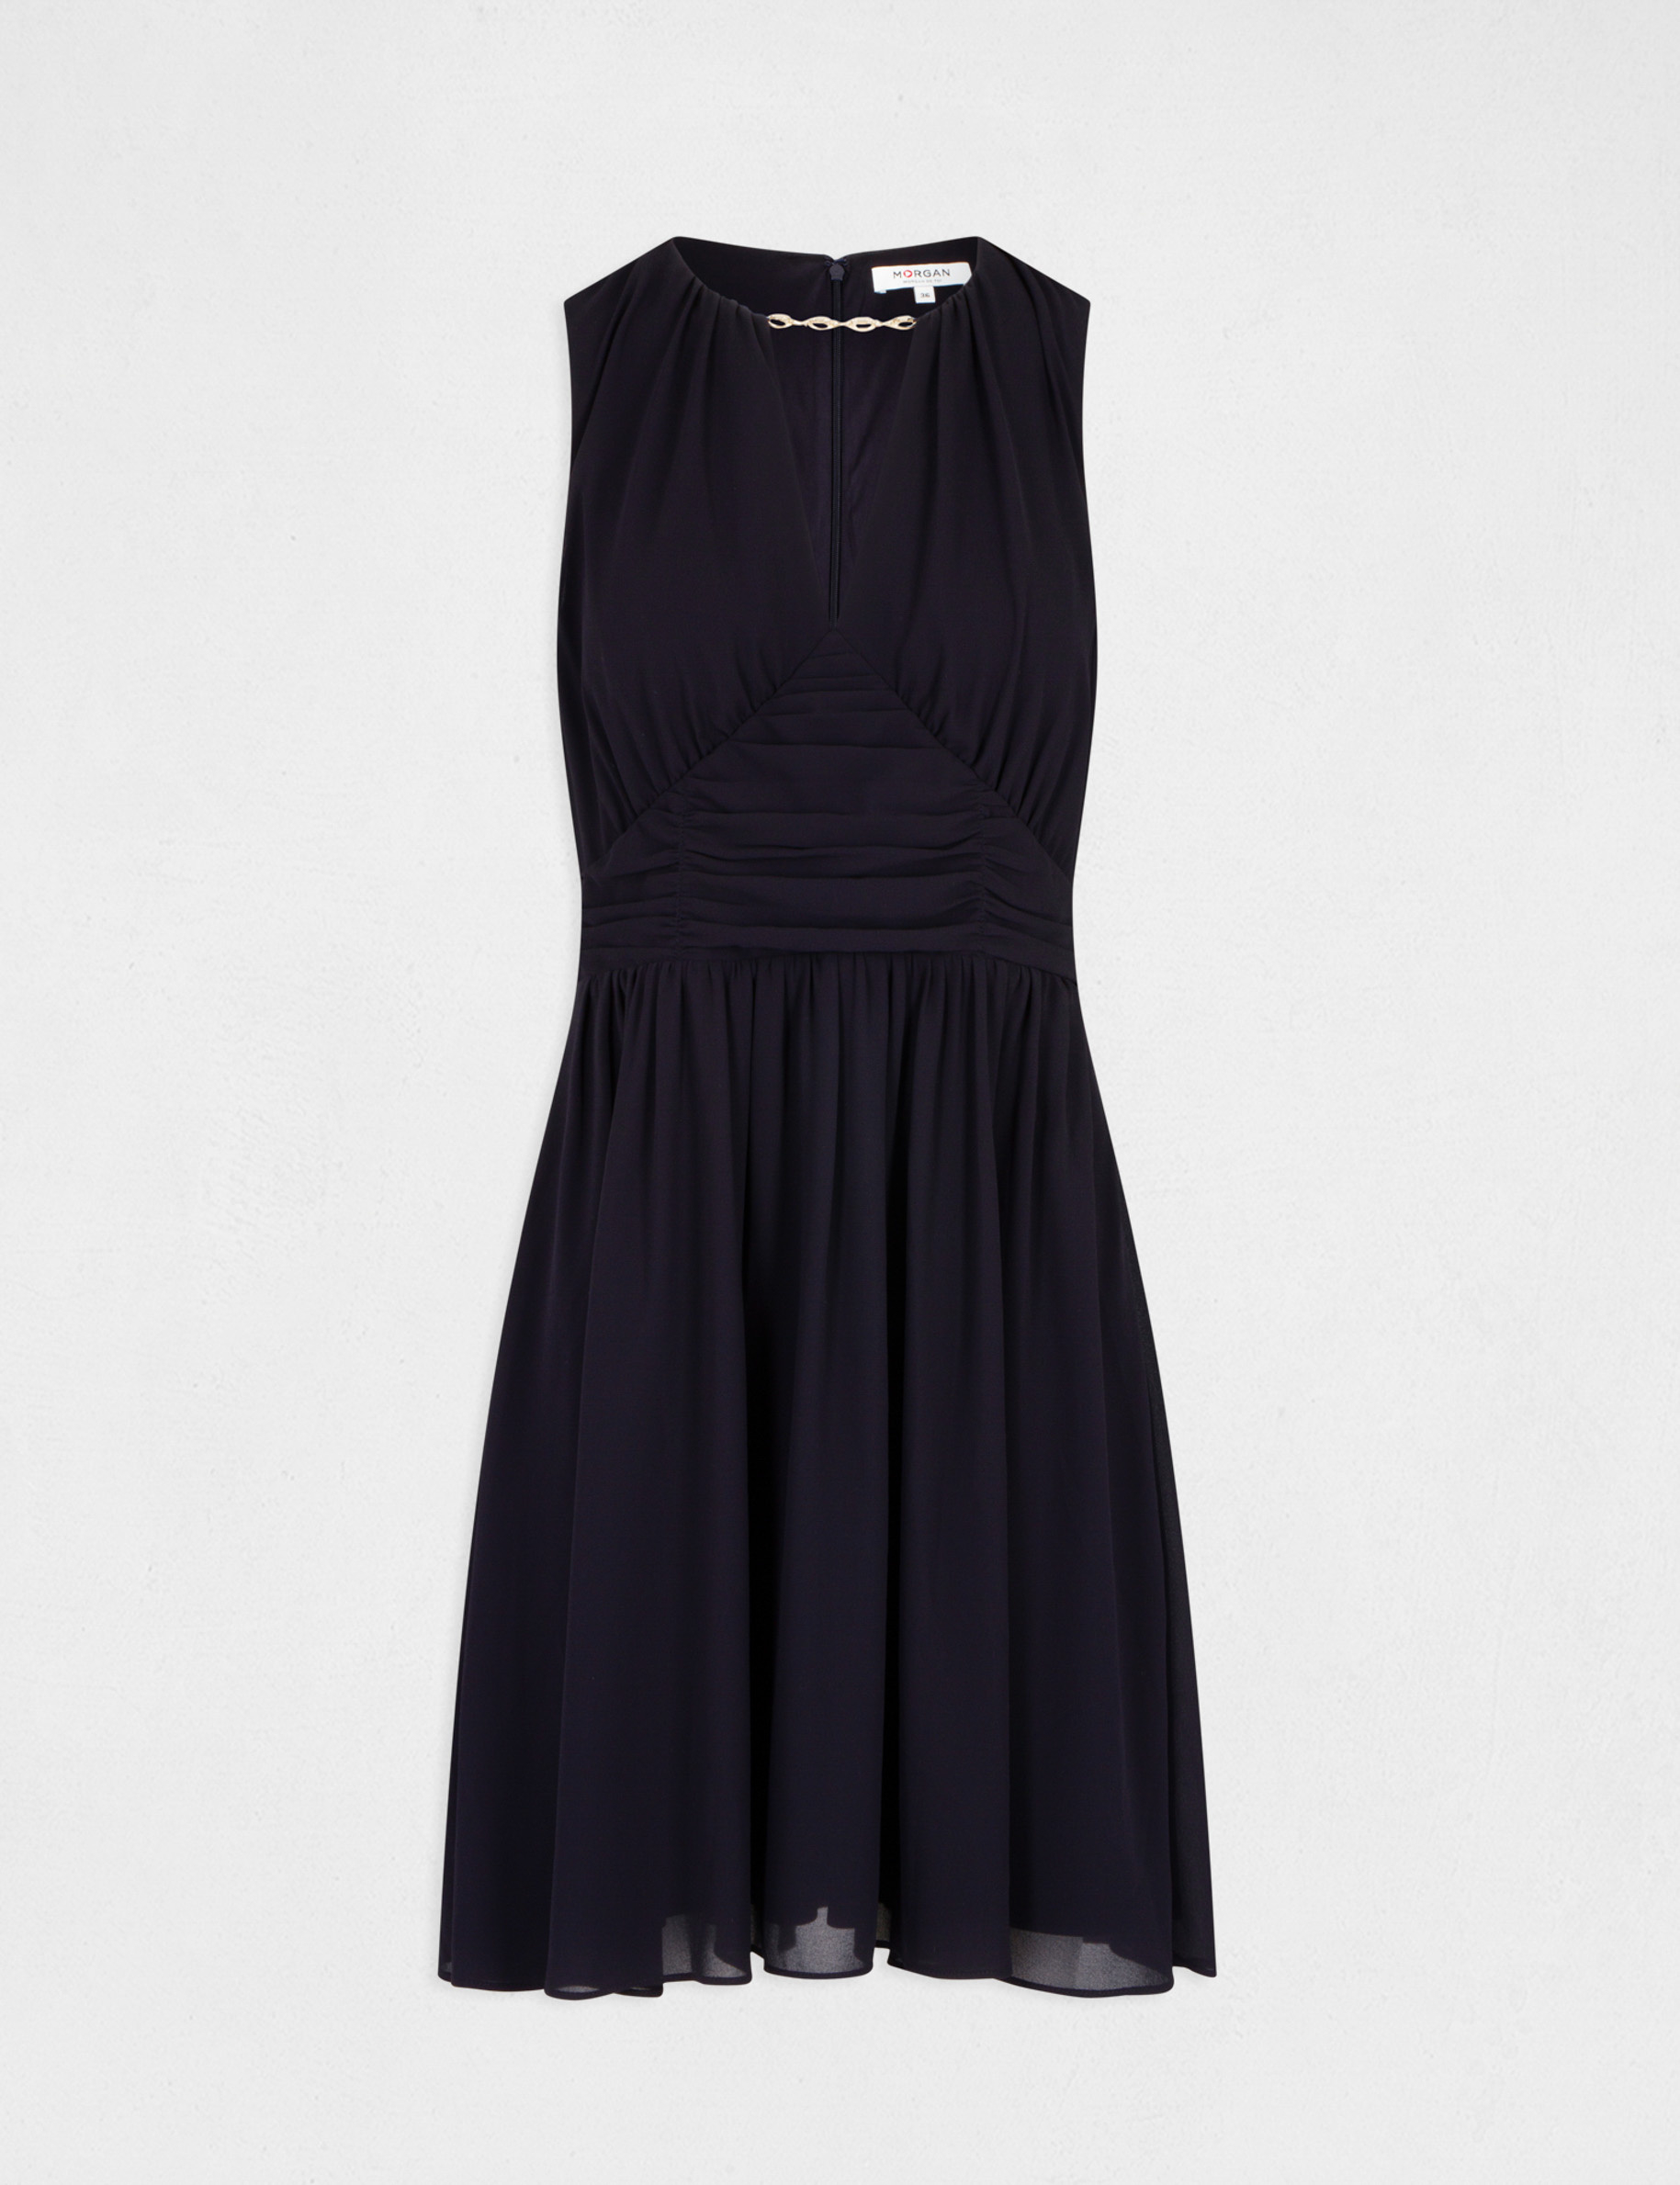 Skater dress with chain detail navy ladies'